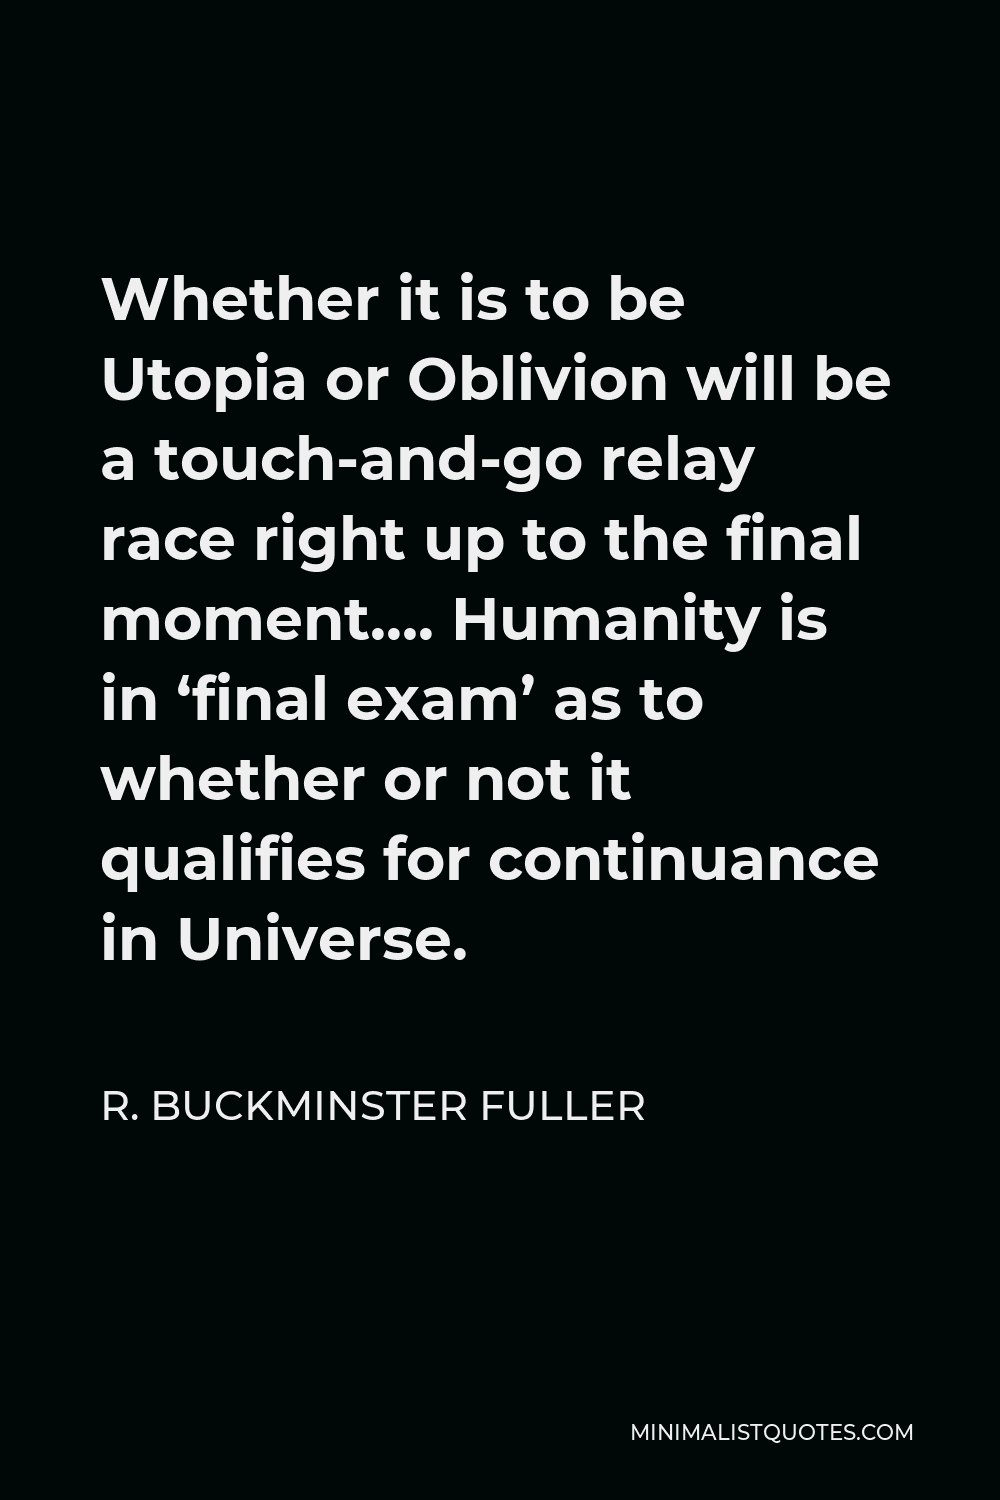 R. Buckminster Fuller Quote - Whether it is to be Utopia or Oblivion will be a touch-and-go relay race right up to the final moment…. Humanity is in ‘final exam’ as to whether or not it qualifies for continuance in Universe.